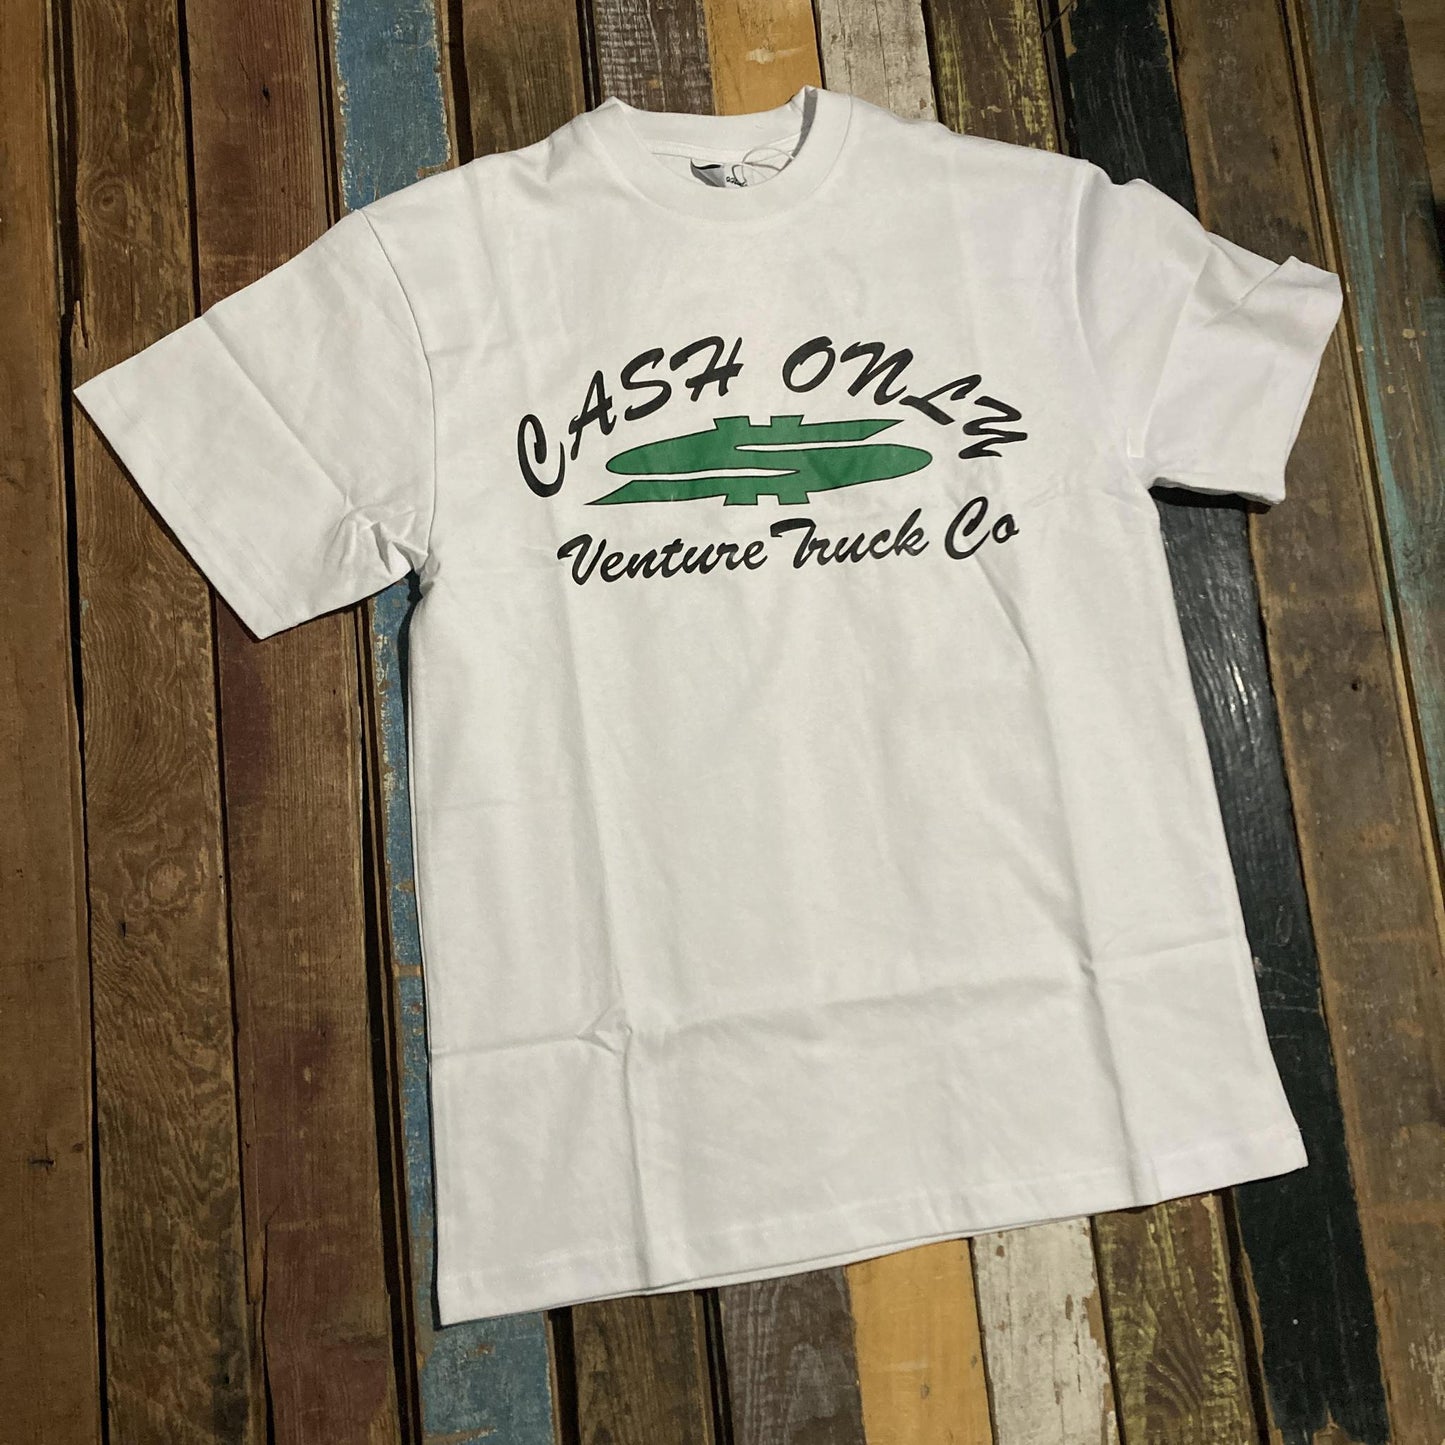 Cash Only X Venture Dollar Sign Tee White